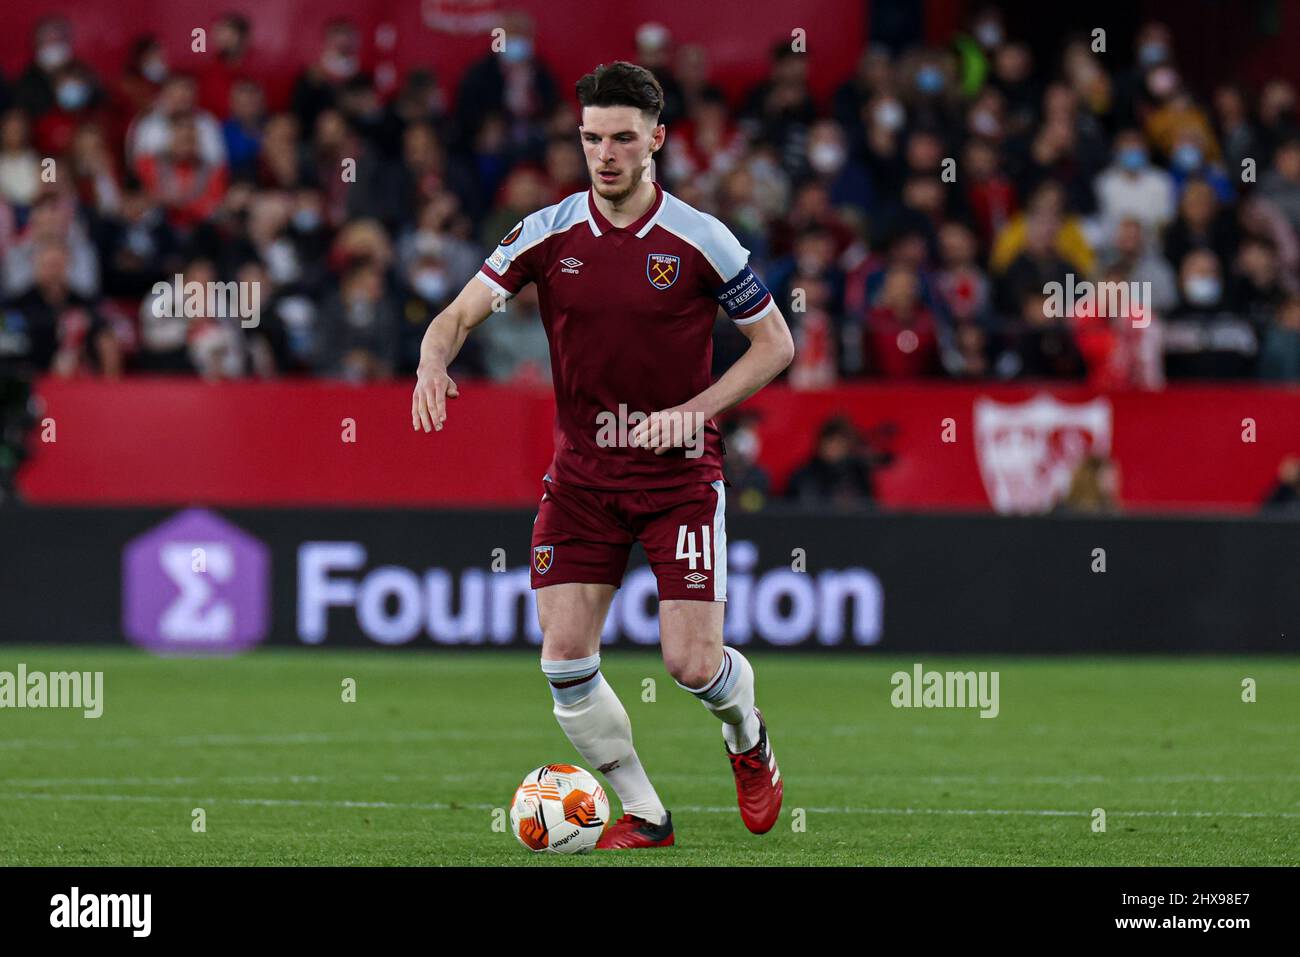 SEVILLE, SPAIN - MARCH 10: Declan Rice of West Ham United during the UEFA Europa League match between Sevilla and West Ham United at Ramon Sanchez Pizjuan on March 10, 2022 in Seville, Spain (Photo by Dax Images/Orange Pictures) Stock Photo